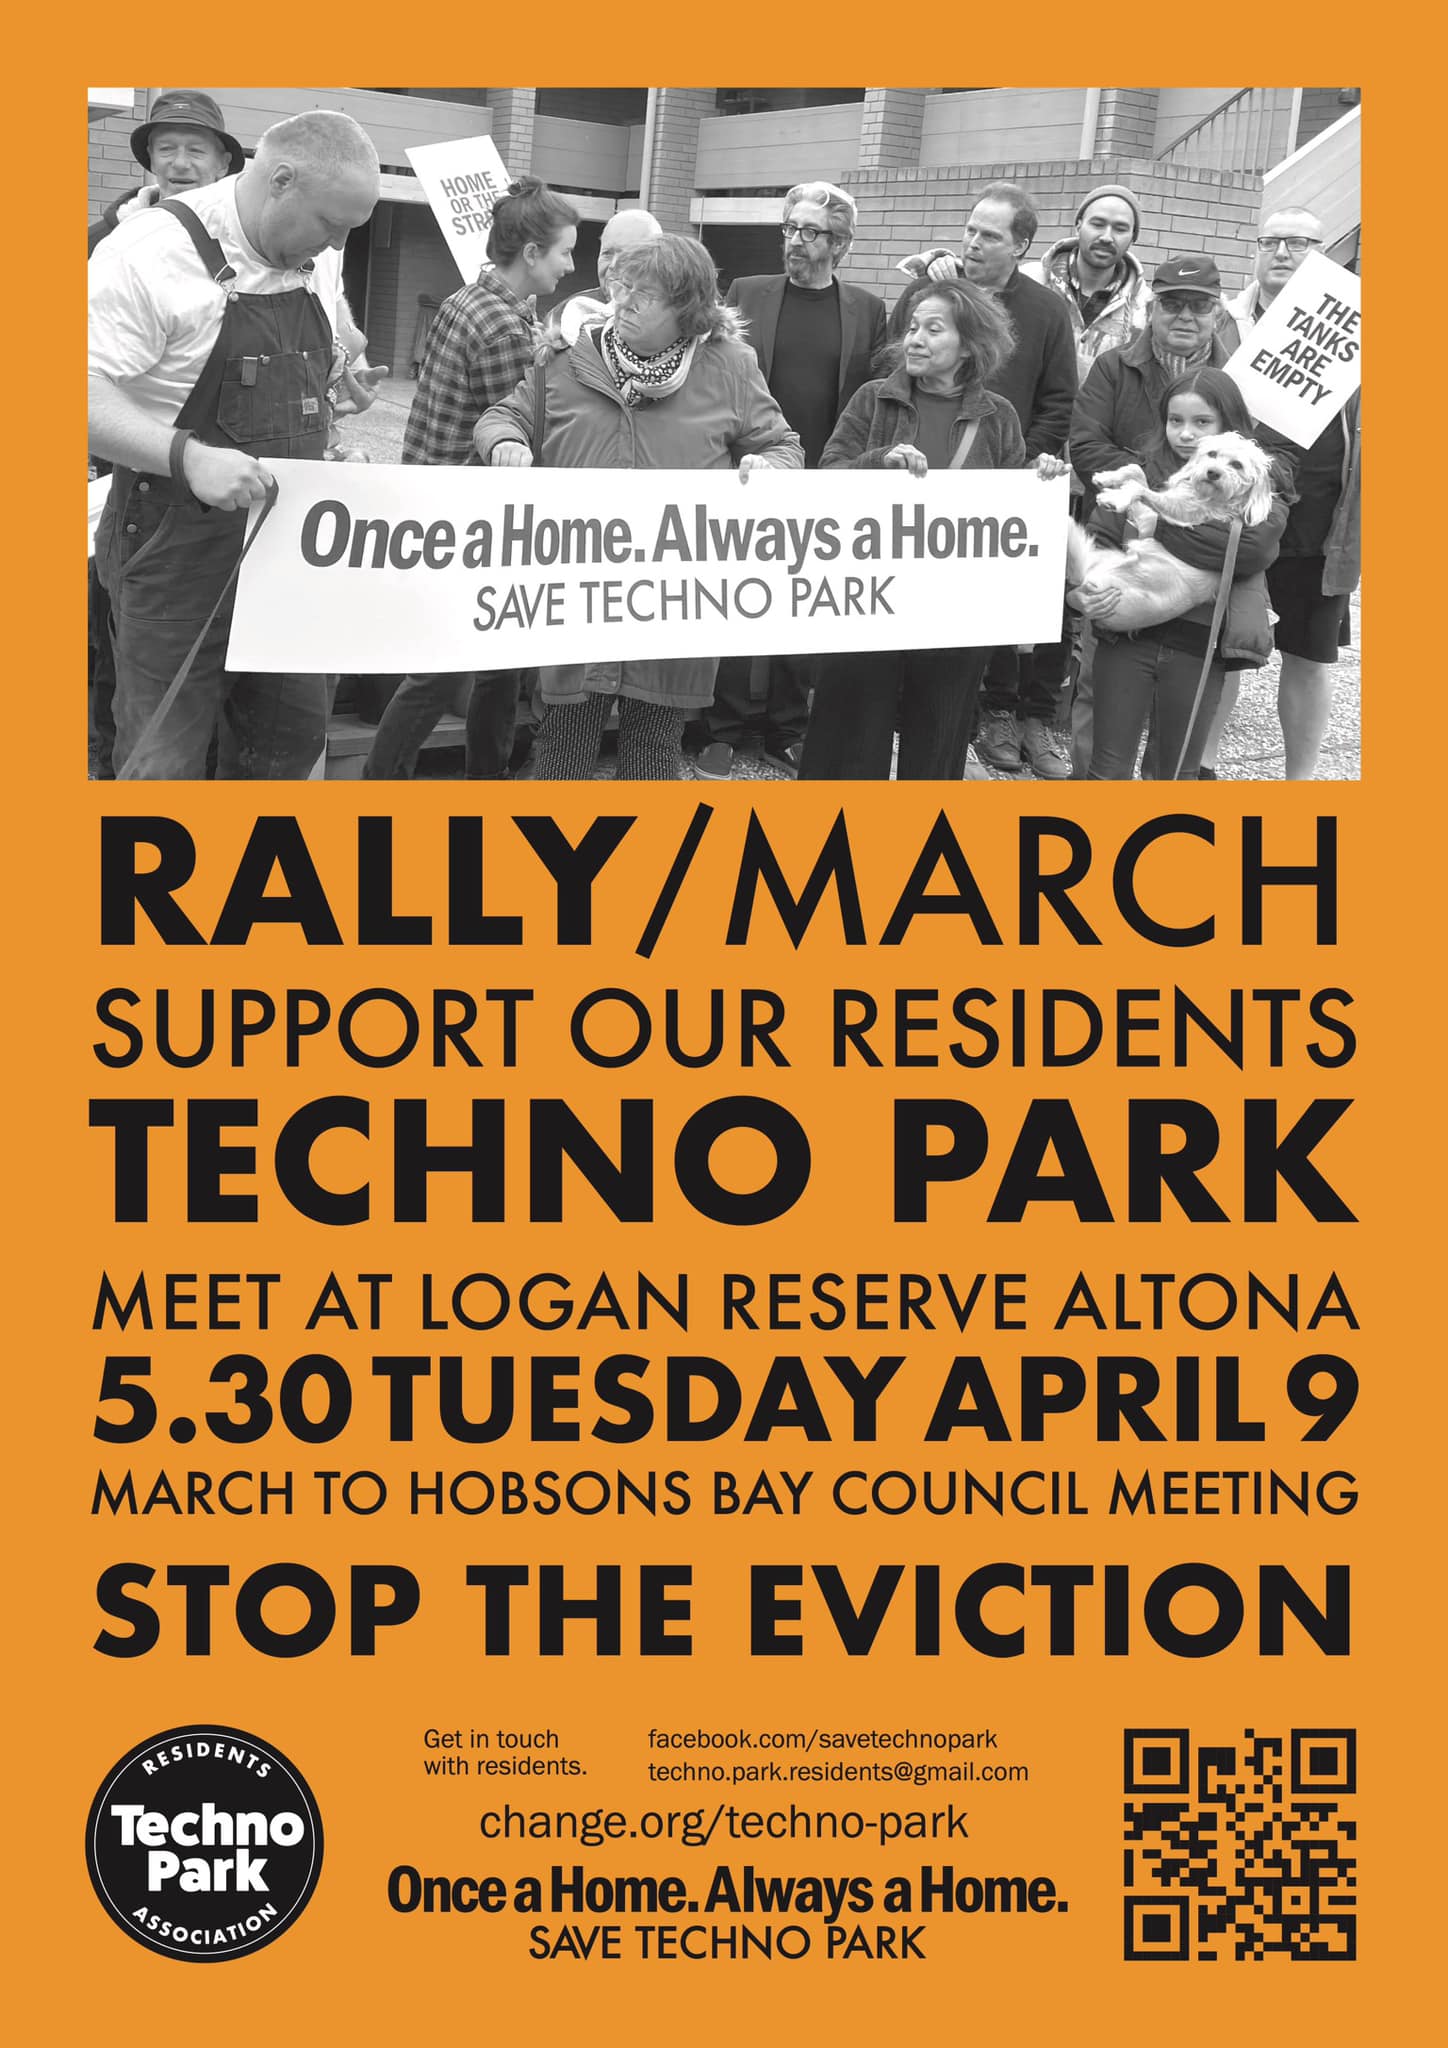 Save Techno Park Rally and March information flyer for action on Tuesday April 9 at 5:30PM meeting at Logan Reserve Altona and marching to Hobsons Bay Council to stop the evictions of techno park residents.